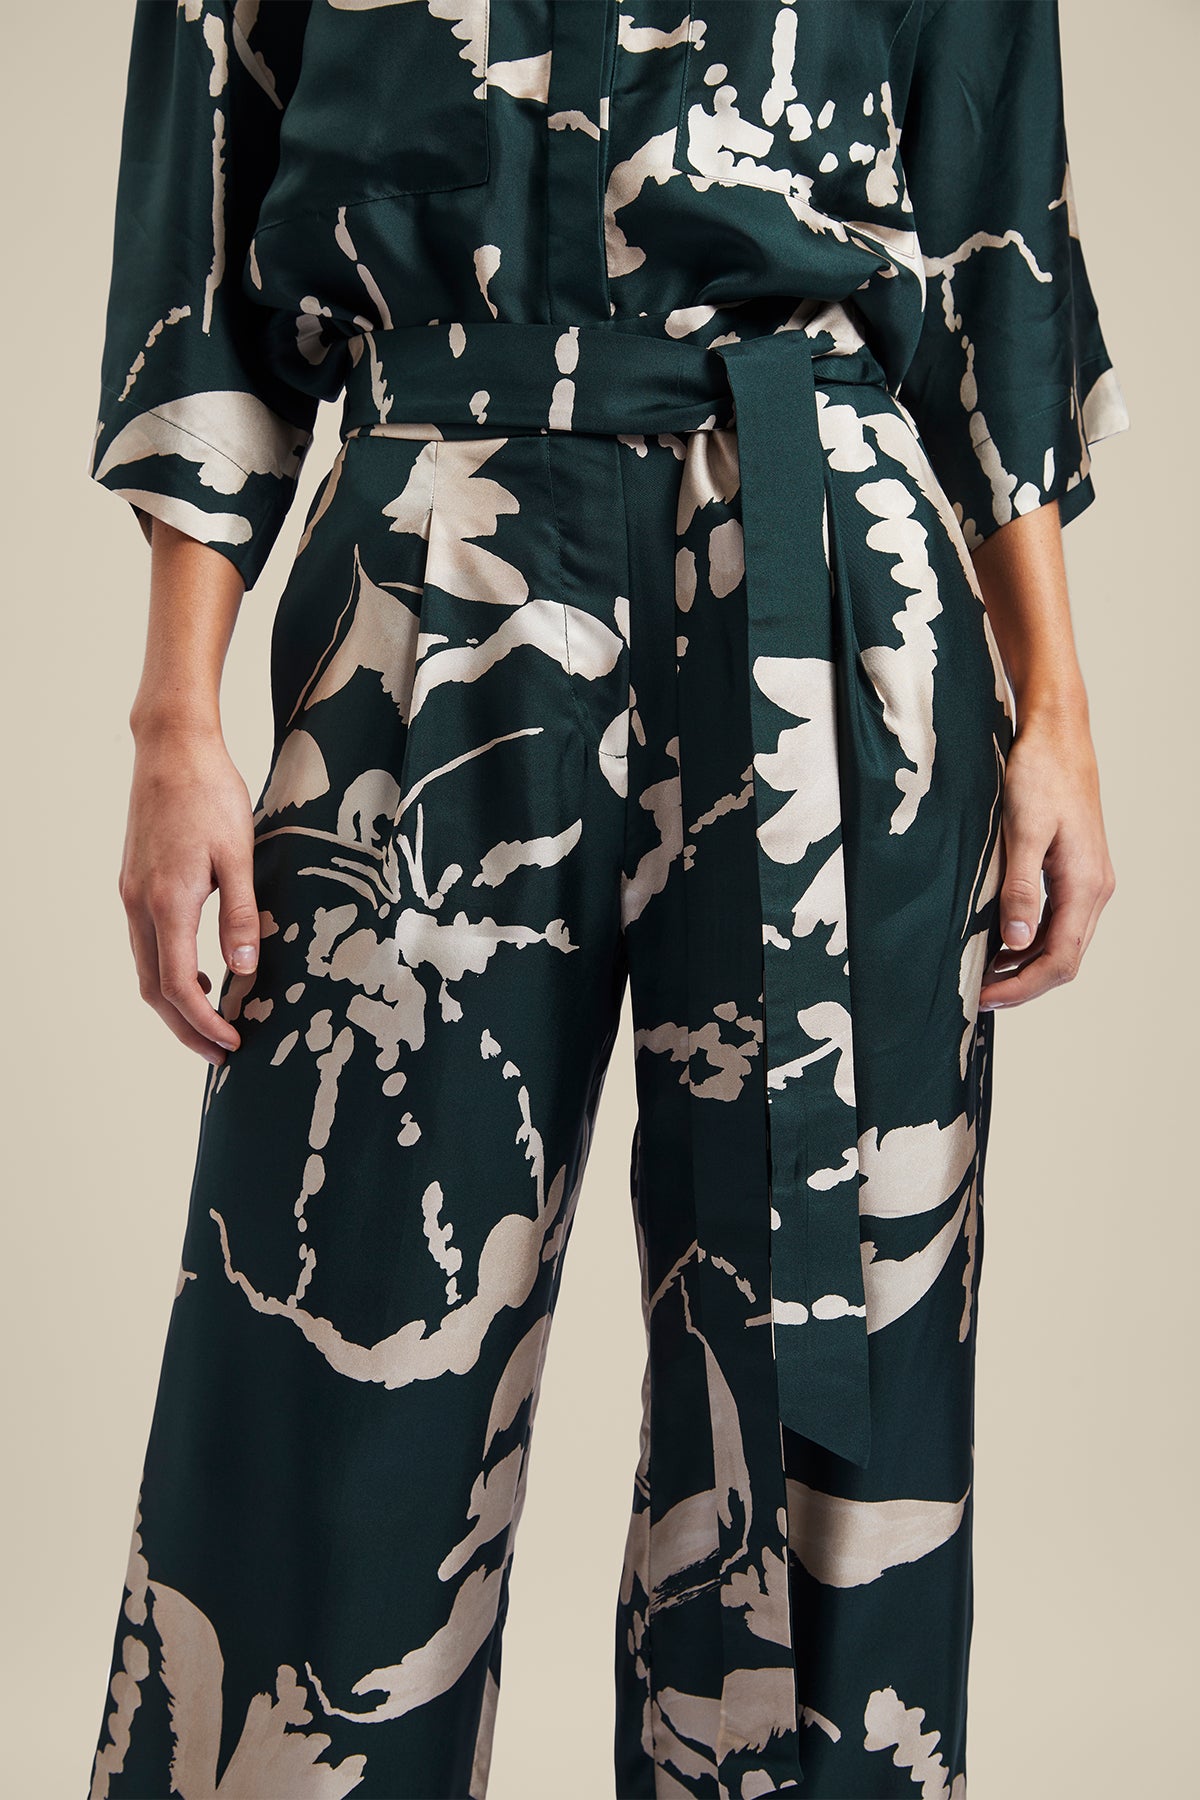 Model wearing the Memoirs Pant from Australian Fashion Designer Ginger and Smart featuring is an abstract floral in green and crème with elastic waist and drawstring detail. Worn with the matching Memoirs Blouse.